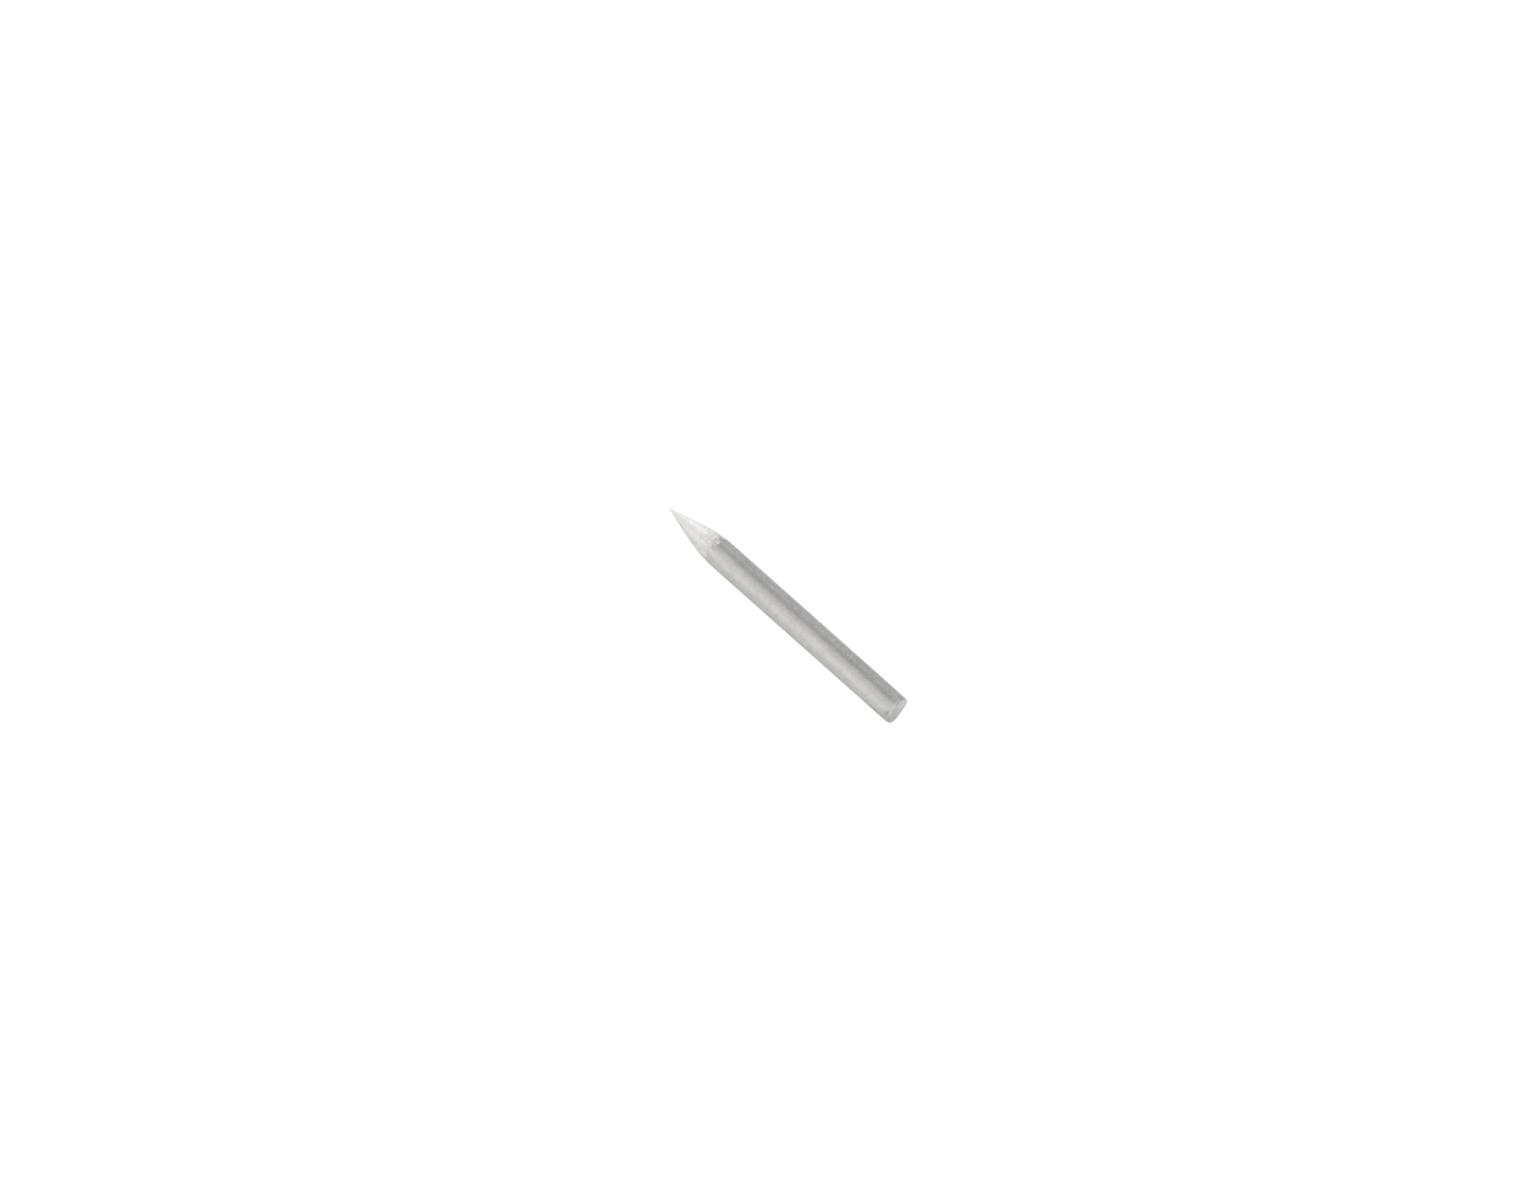 TapeTech® Gooser Needle. Part number 059049